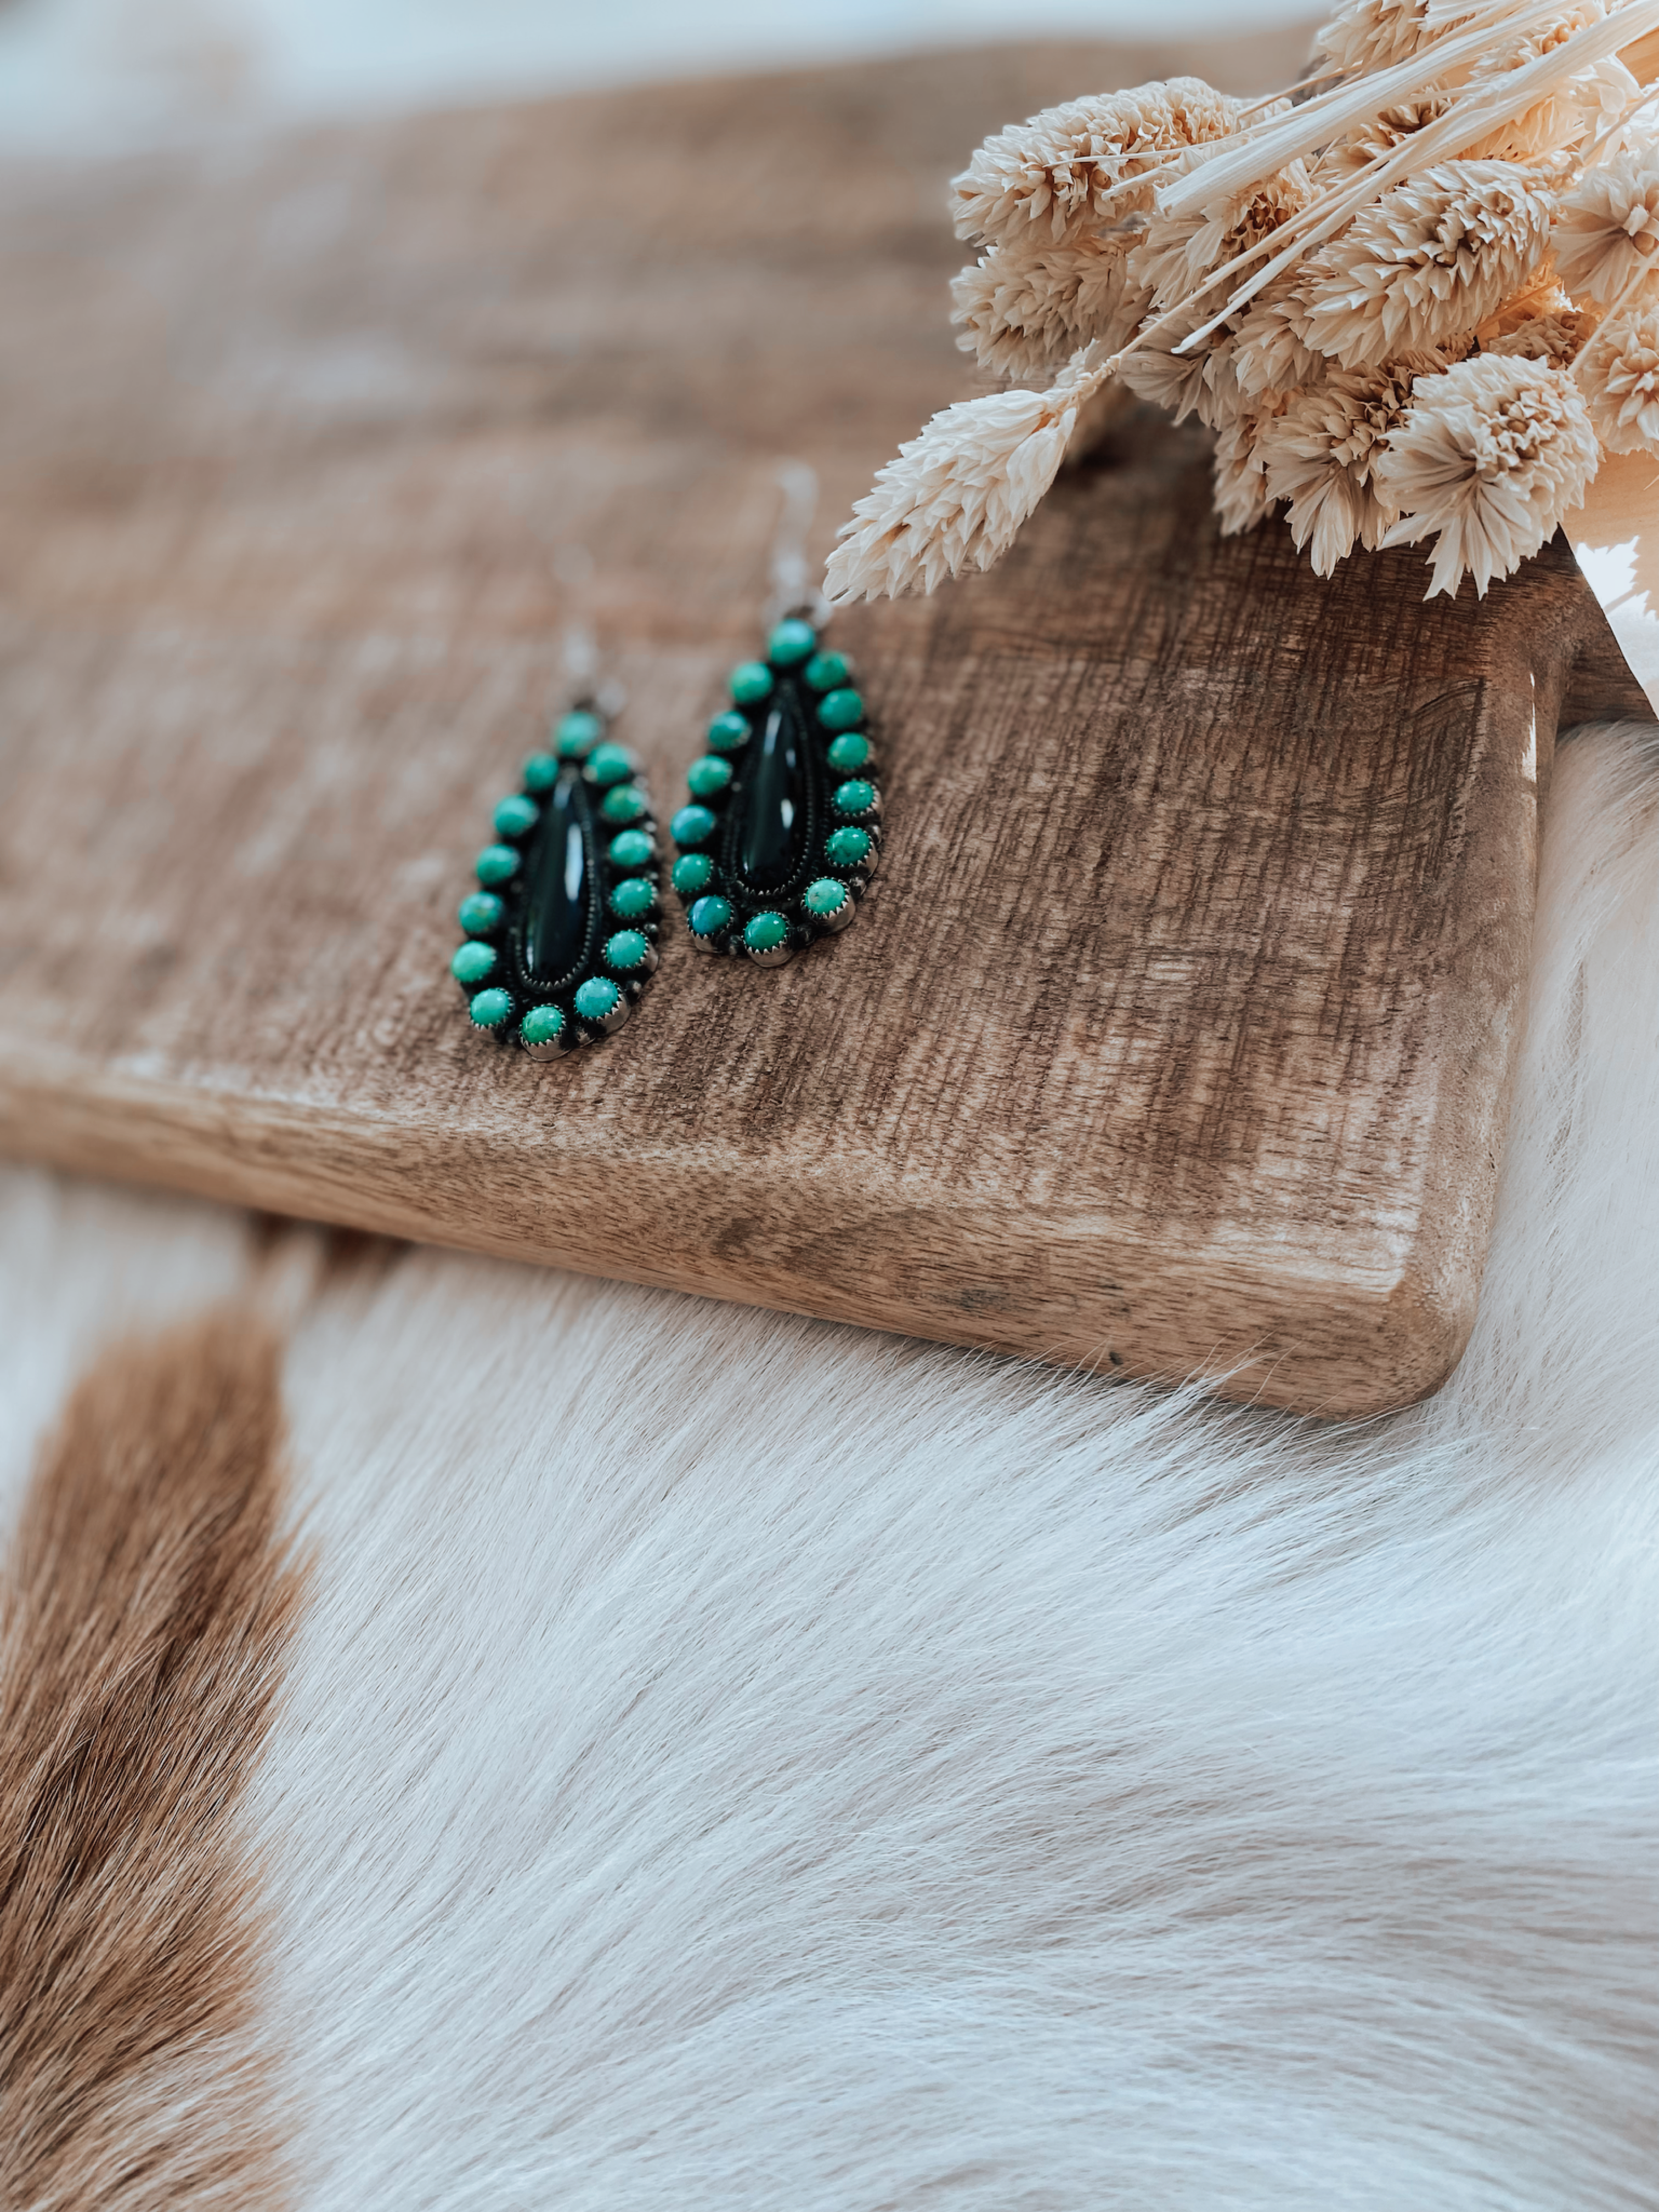 Black Onyx and Turquoise Earrings